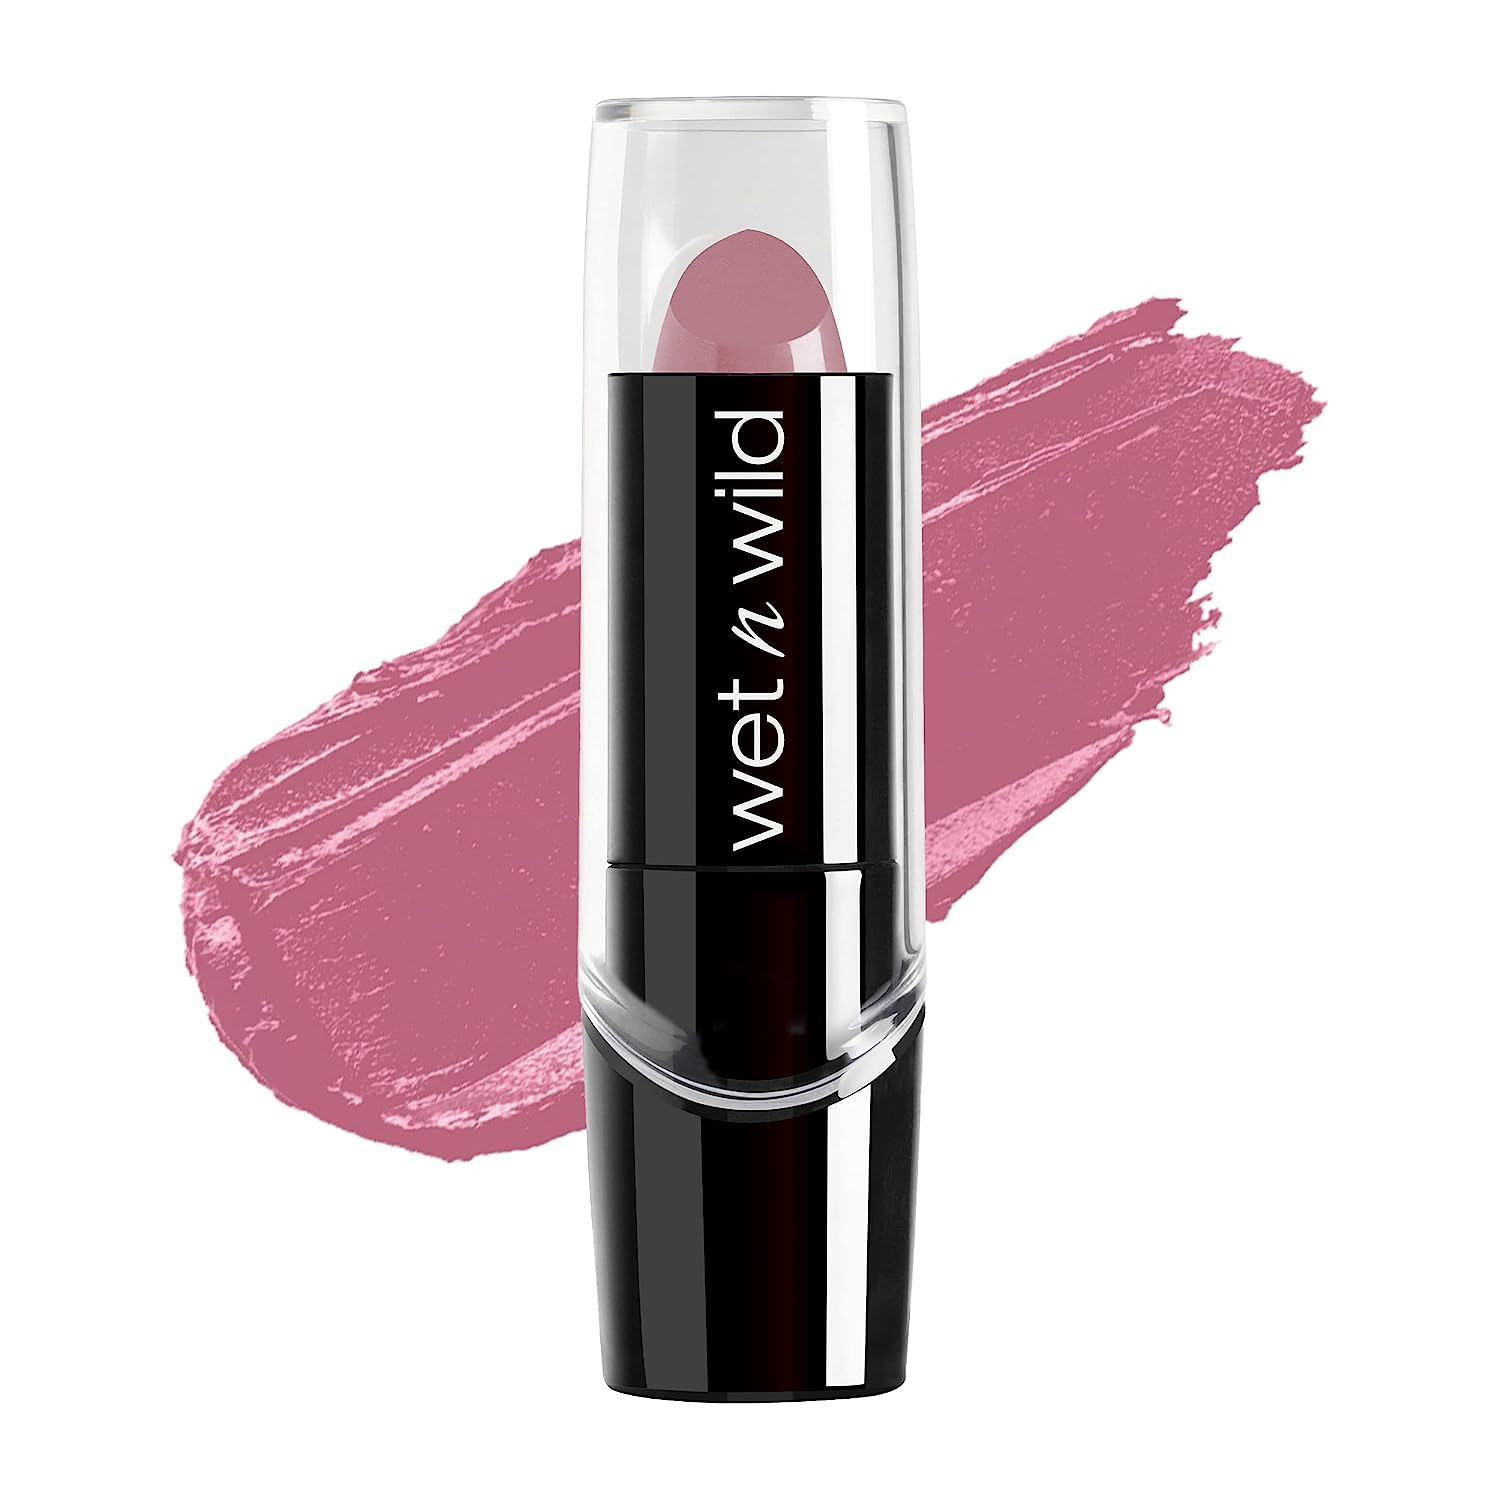 wet n wild Silk Finish Lipstick - Will You Be With Me? - Will You Be With Me? - image 1 of 3